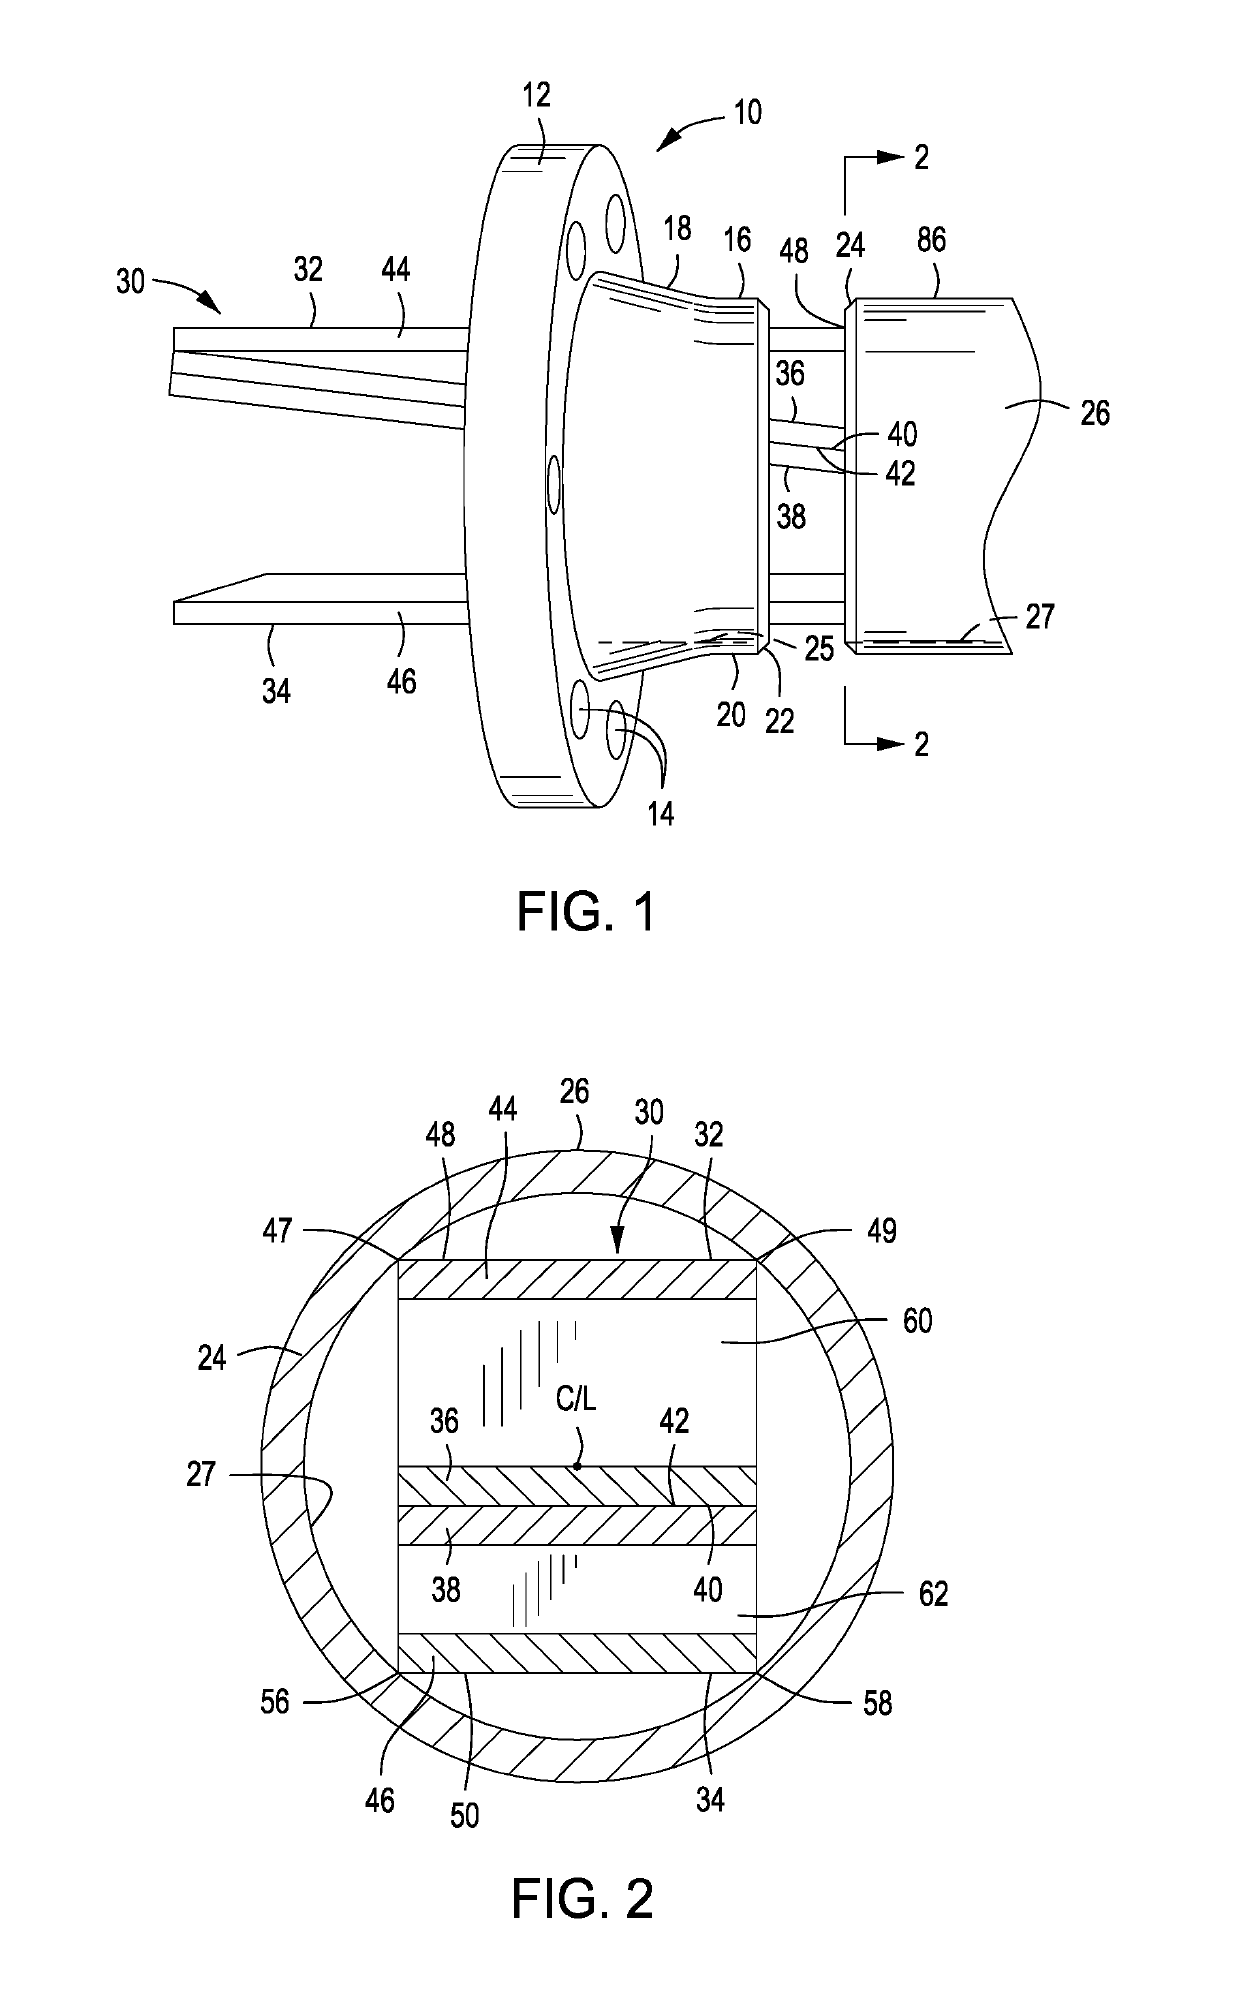 Method and apparatus for precision alignment and tack welding of weld-neck pipe fittings to pipe